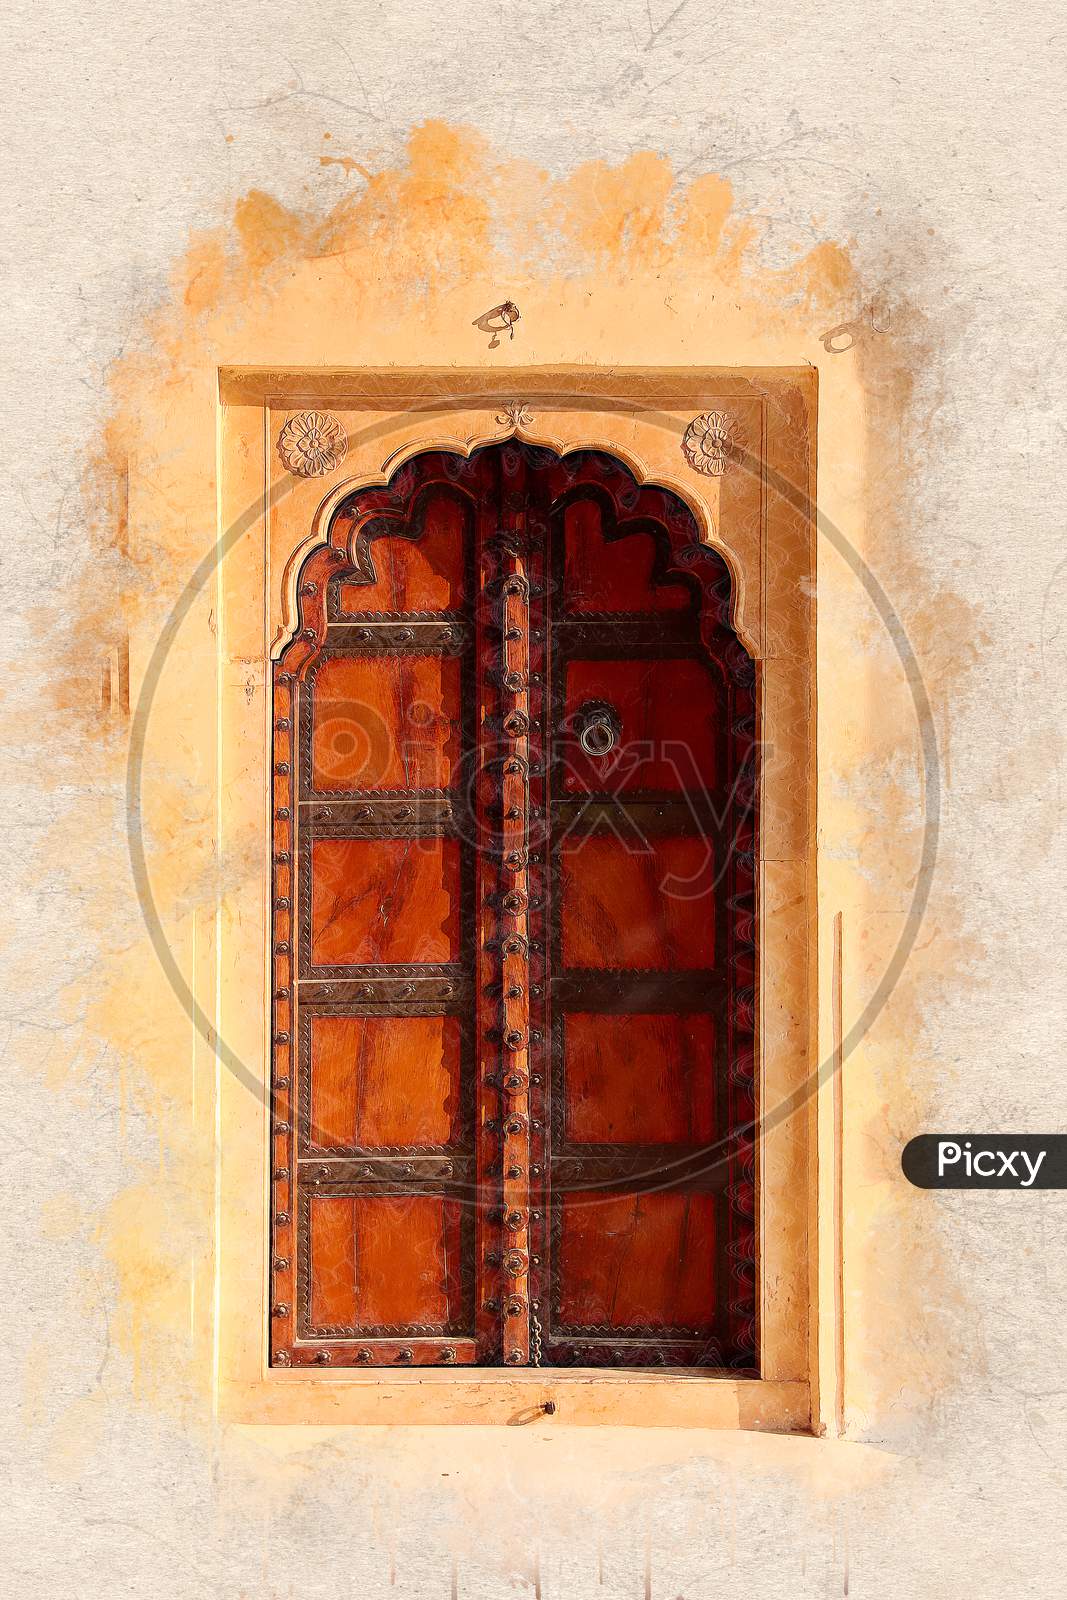 Digital Painting Of Old Style Indian Antique Door In A Fort